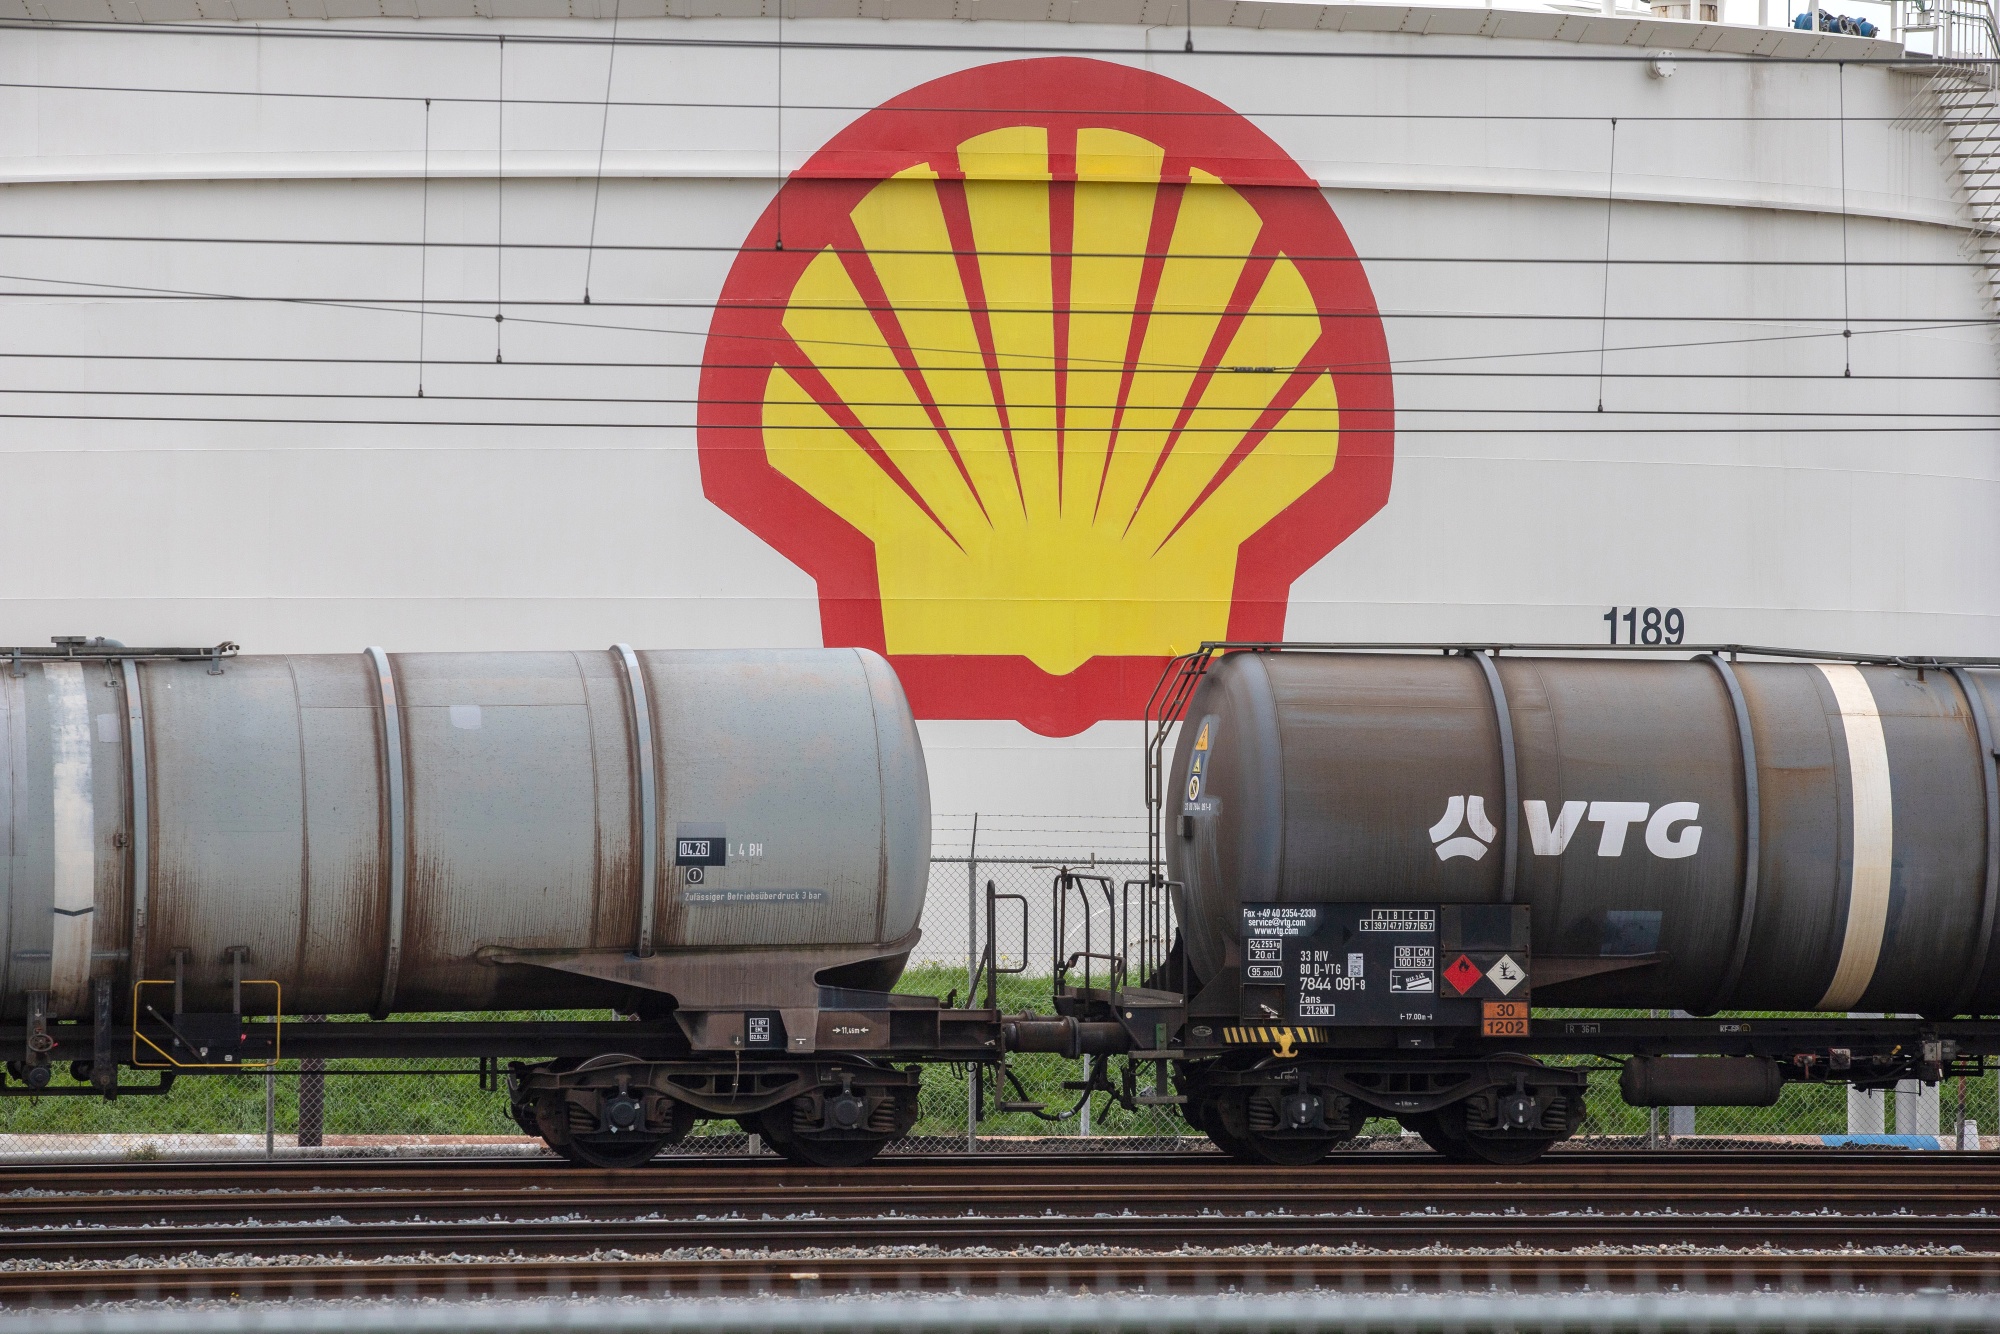 Exclusive: Shell pivots back to oil to win over investors